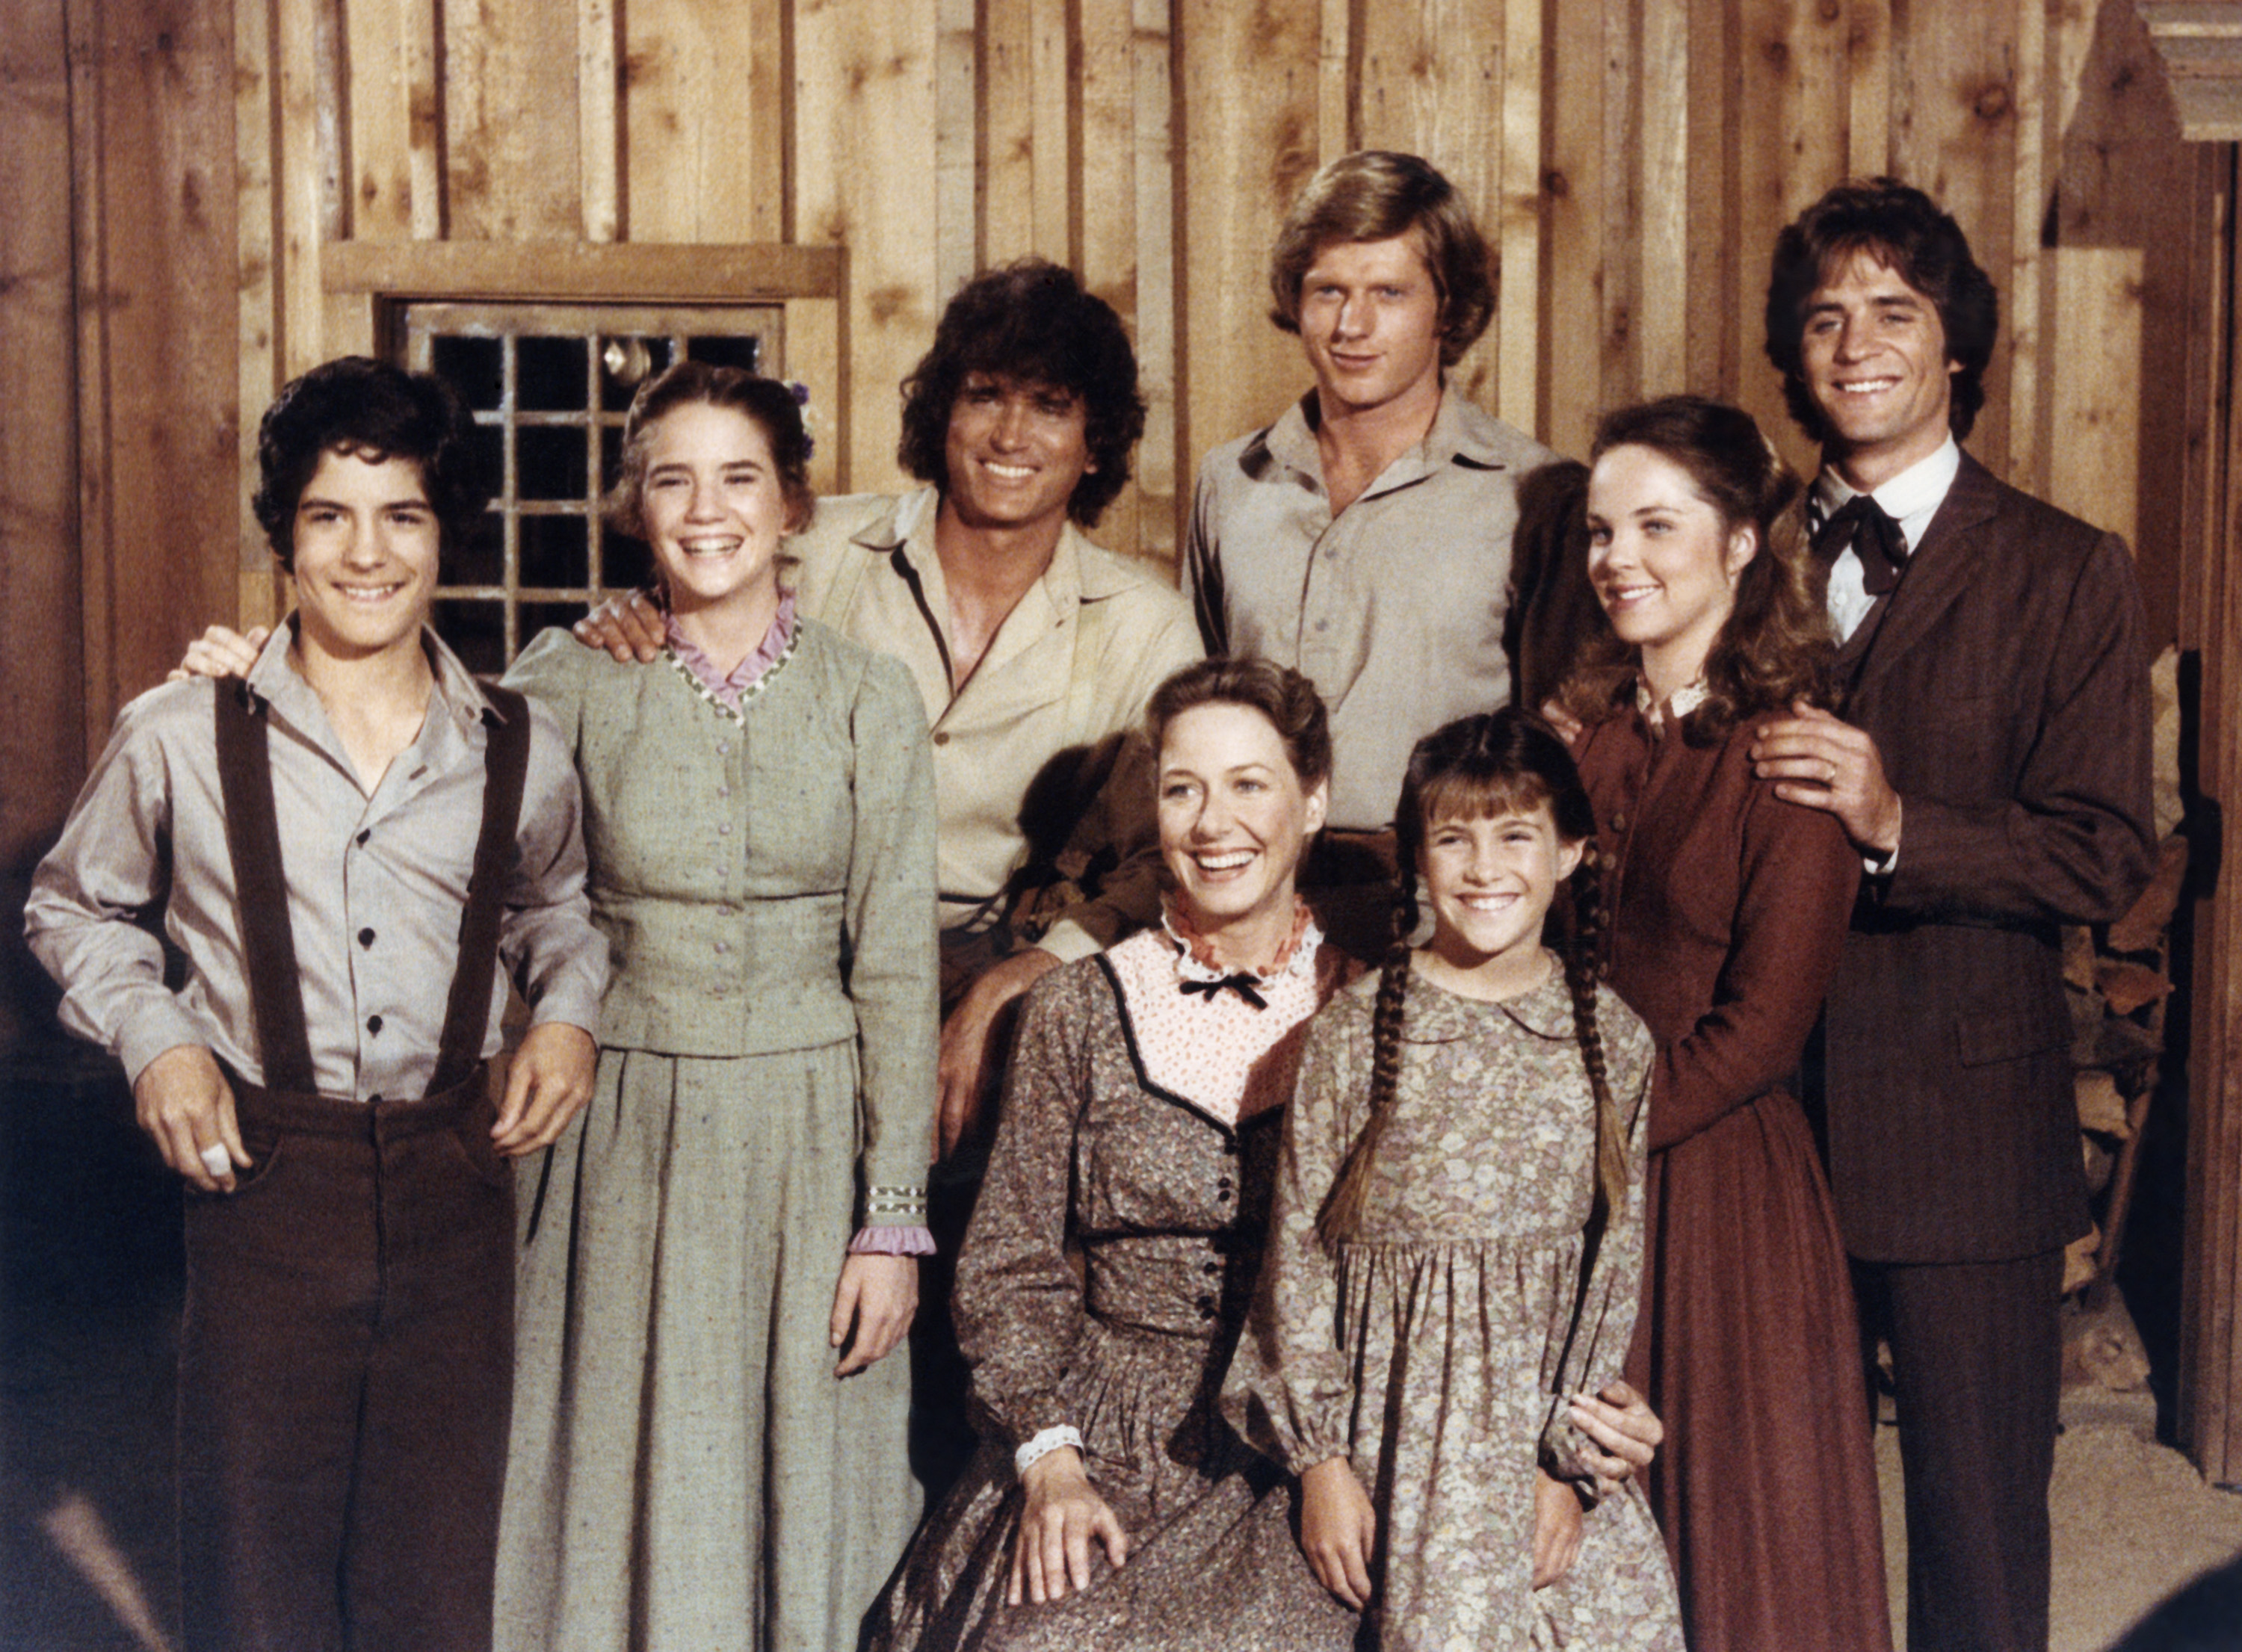 The cast of Little House on the Prairie poses for a picture